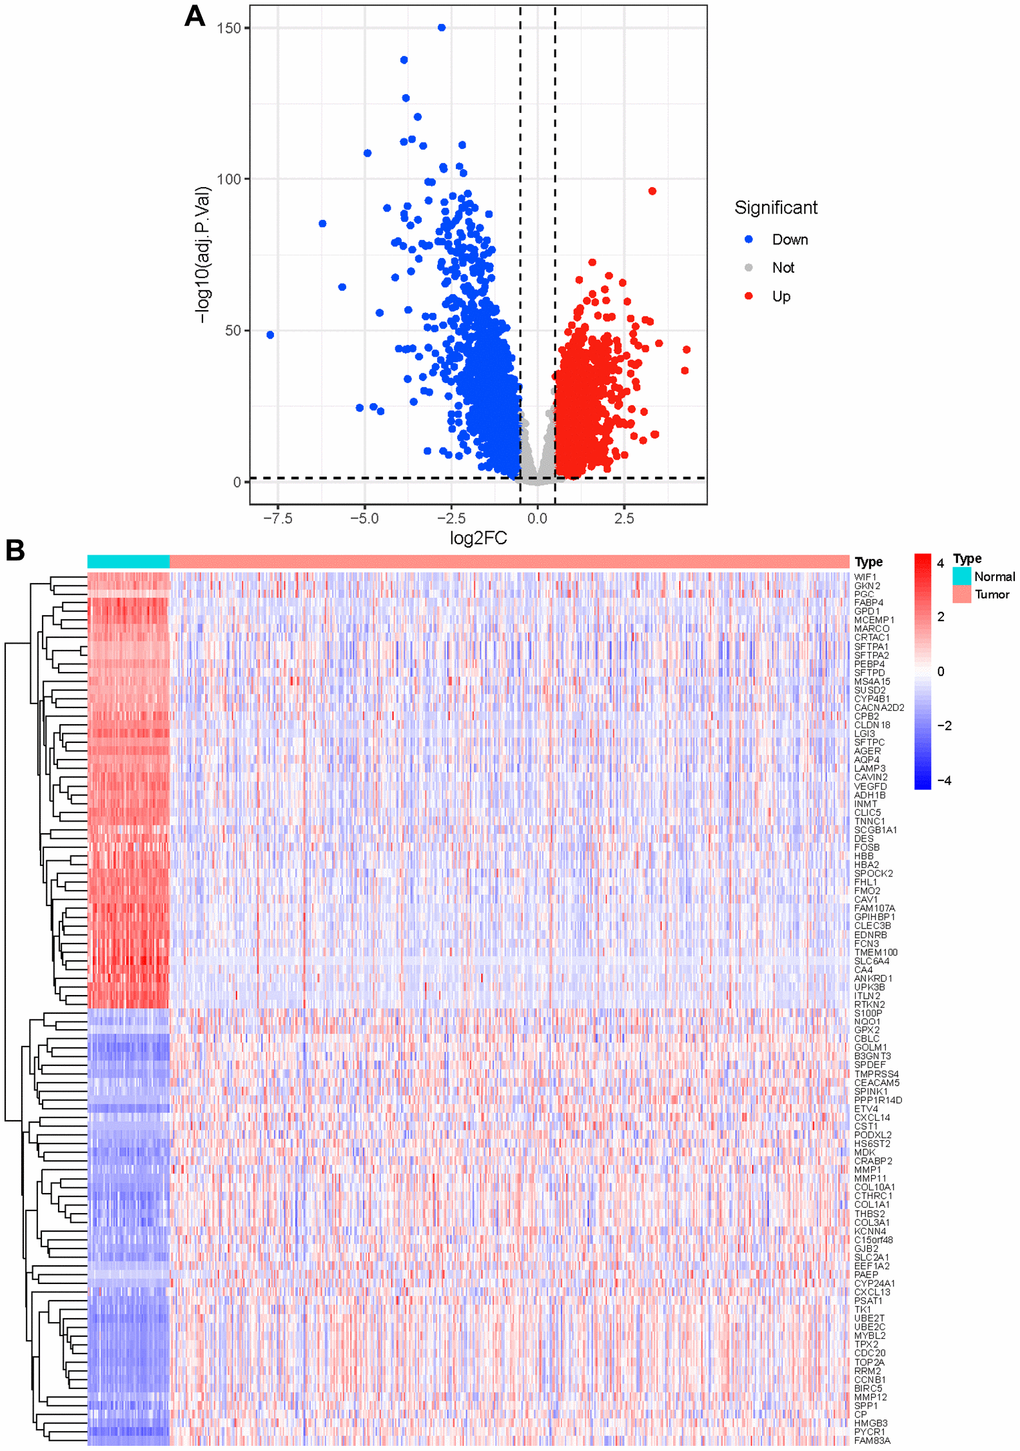 Identification of differential genes. (A) The red dots in the plot represent up-regulated genes and blue dots represent down-regulated genes with statistical significance. Gray dots represent no DEGs; (B) The heatmap of top 50 up-regulated and top 50 down-regulated genes in tumor and normal tissue.